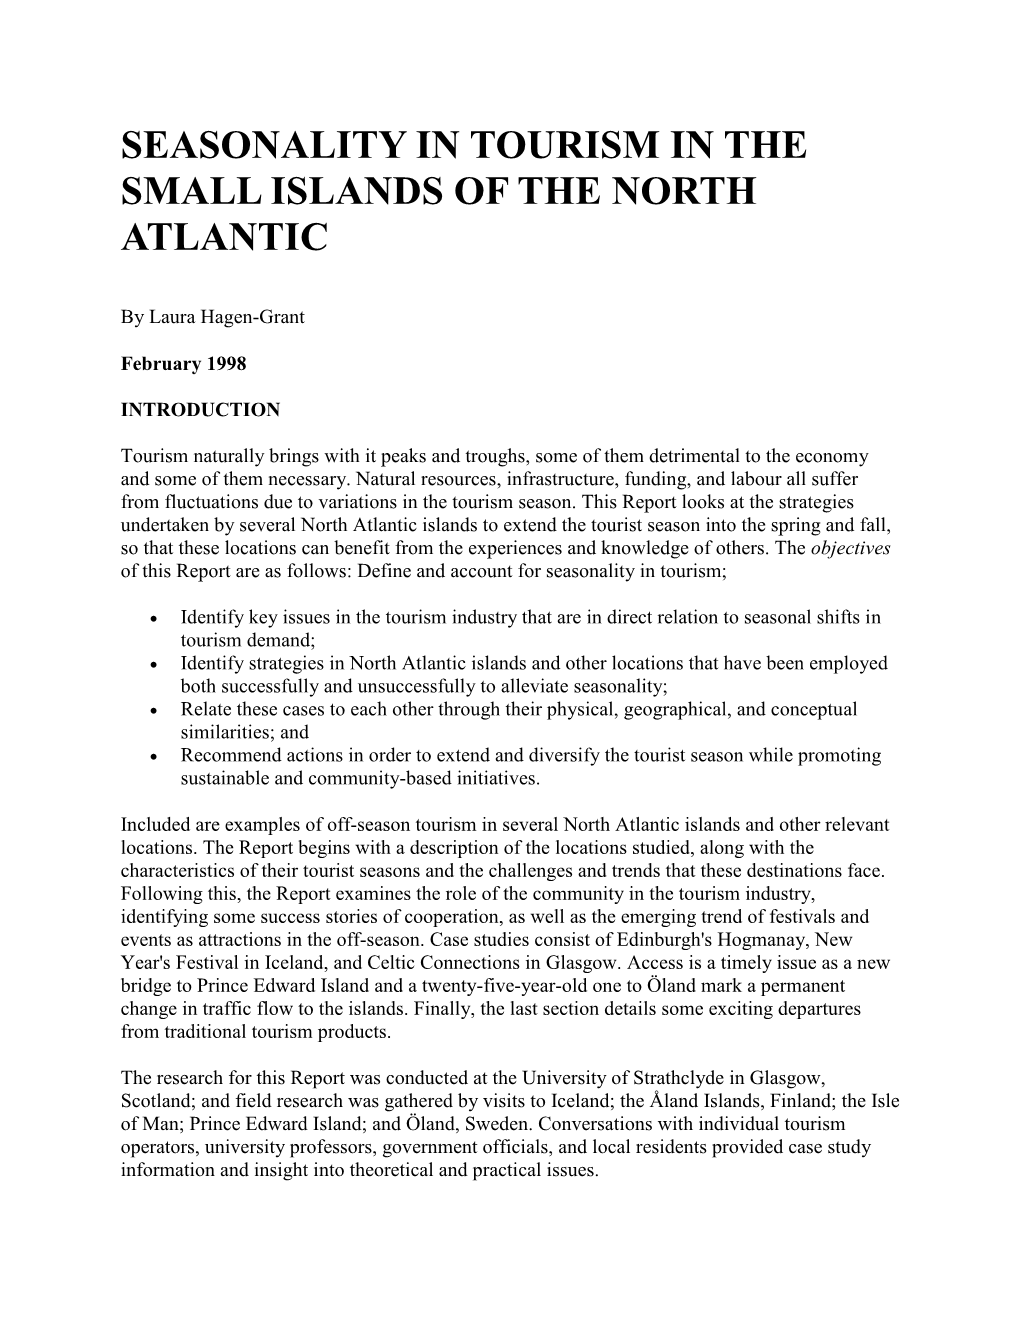 Seasonality in Tourism in the Small Islands of the North Atlantic